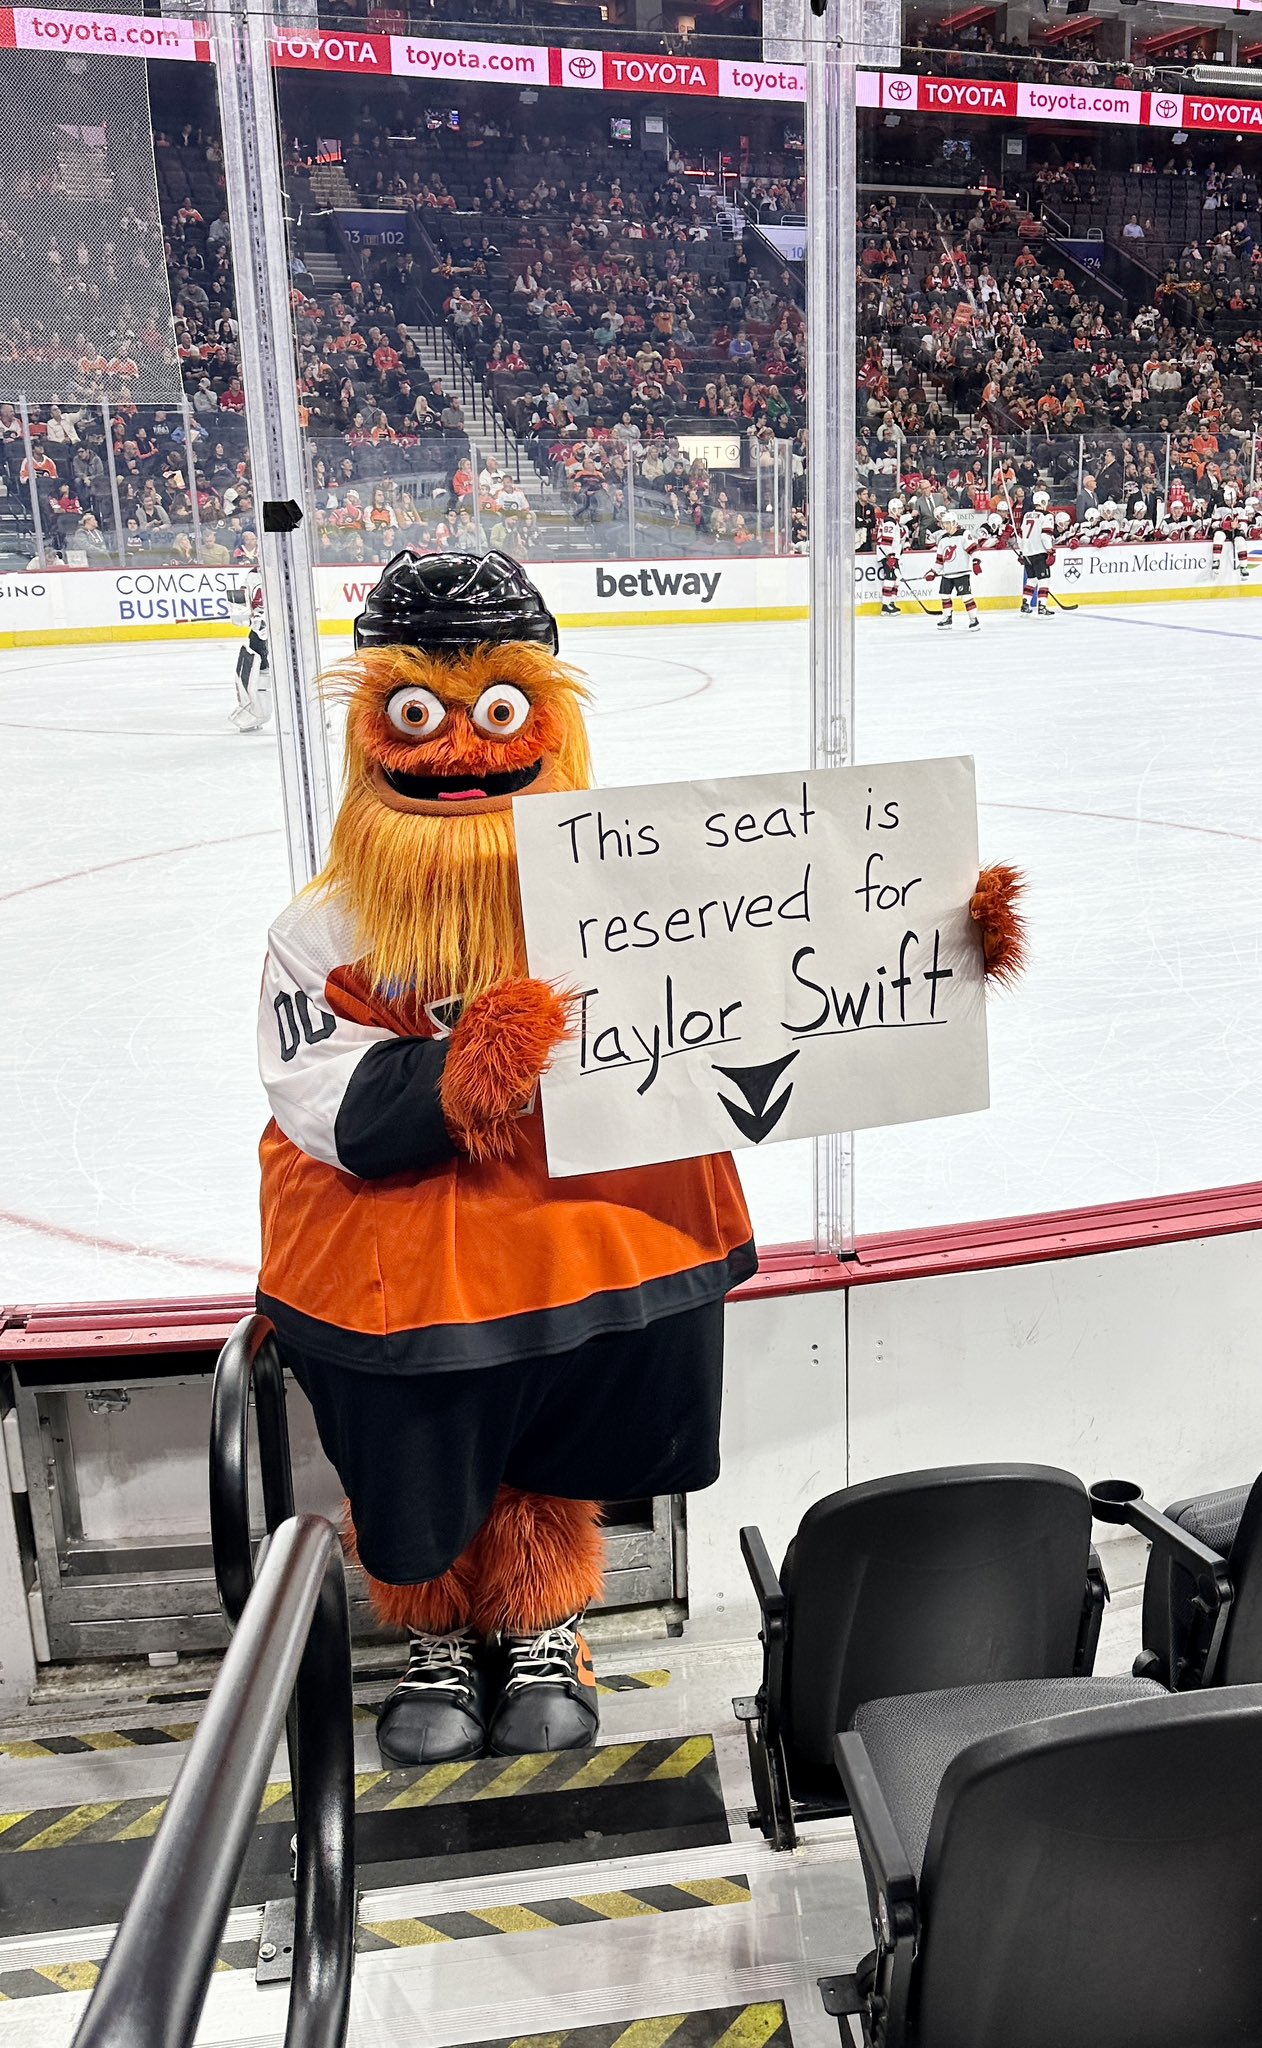 Flyers' Gritty already calls out the Seattle Kraken on Twitter